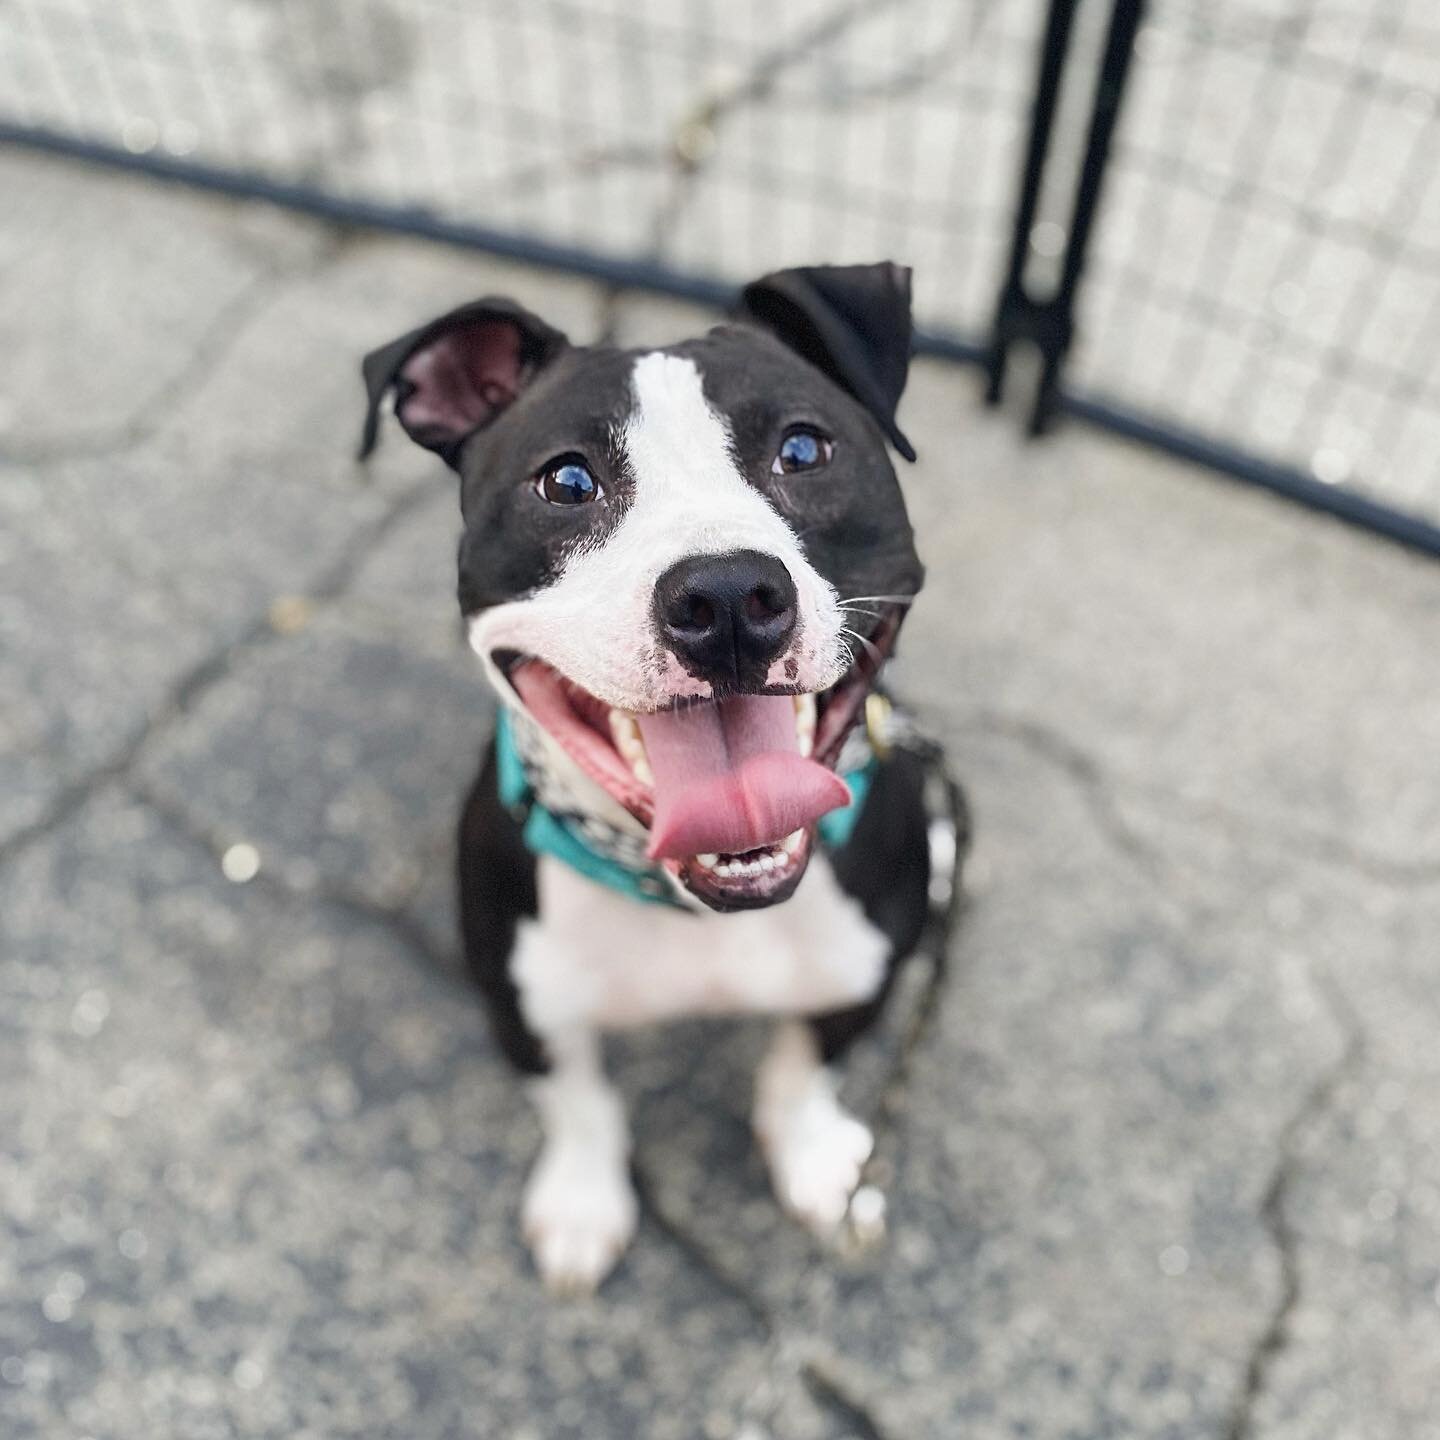 Happy #nationaldogday from P2 resident, David Rose!

If you&rsquo;re looking to add a lucky, deserving pup like DR to your family, fill out an adoption form at barknation.org/adoptable

#barknation #shelterdogs #pitnessprotection #lifeafterdogfightin